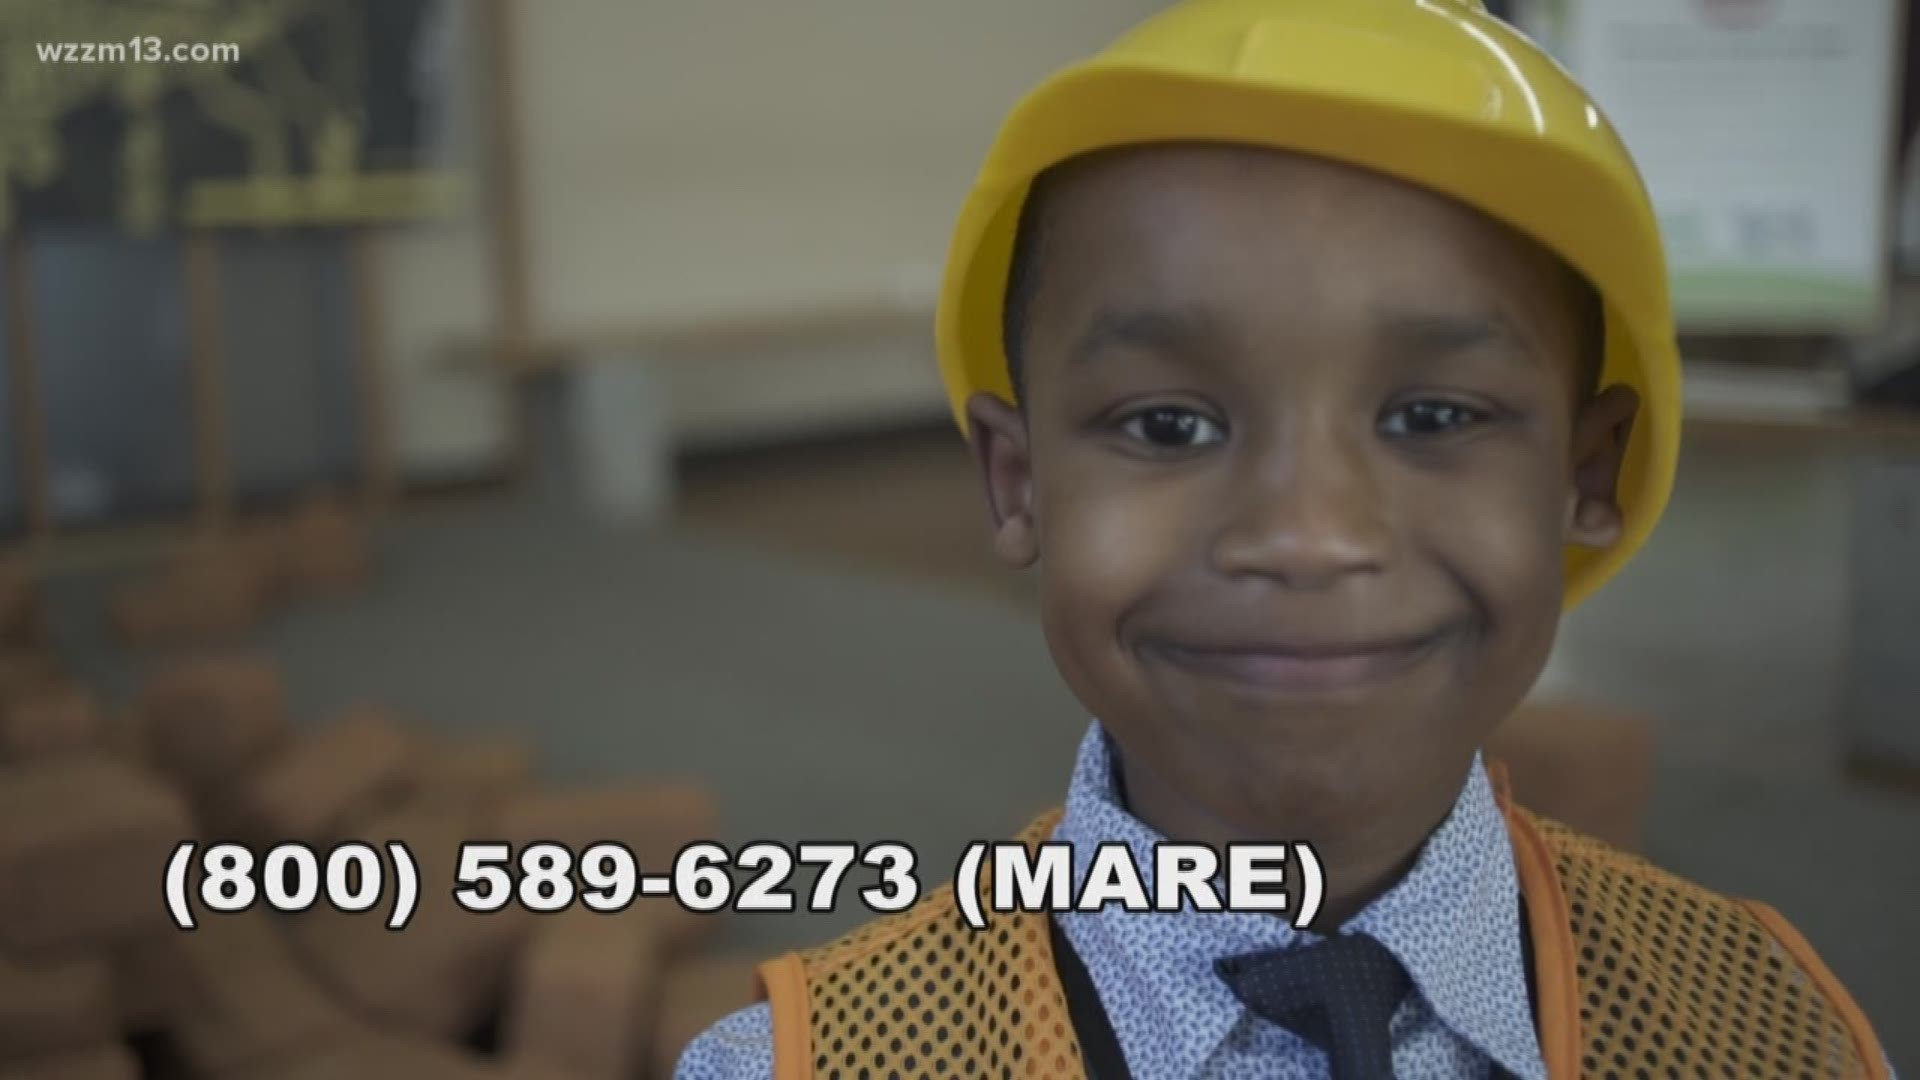 This sweet and very energetic 7-year-old loves LEGOS, pizza, dogs and wants to be a firefighter when he grows up.